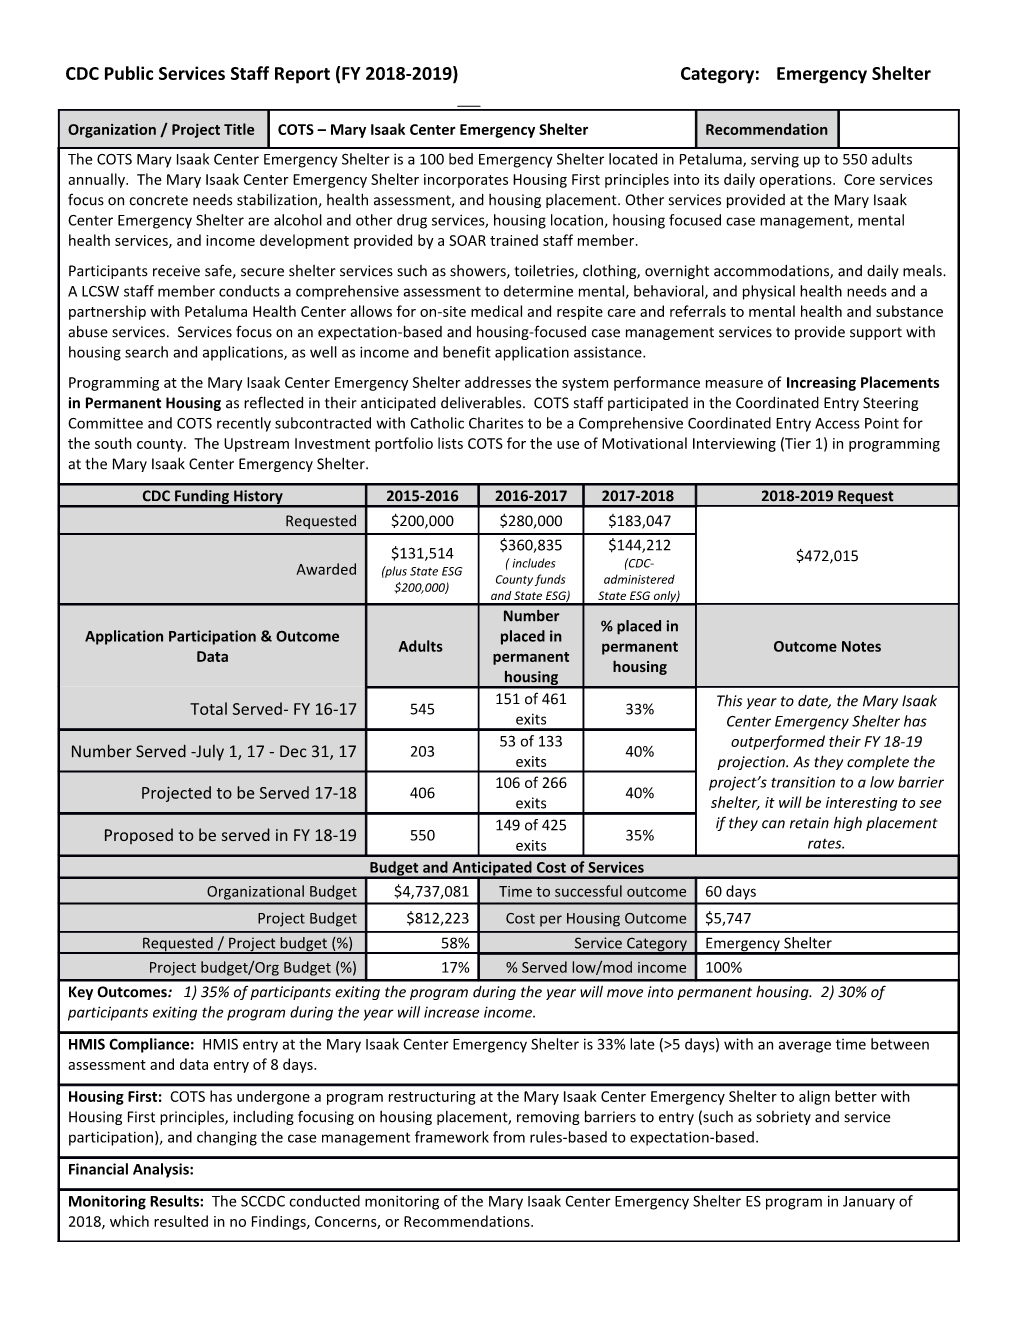 CDC Public Services Staff Report (FY 2018-2019) Category:Emergency Shelter